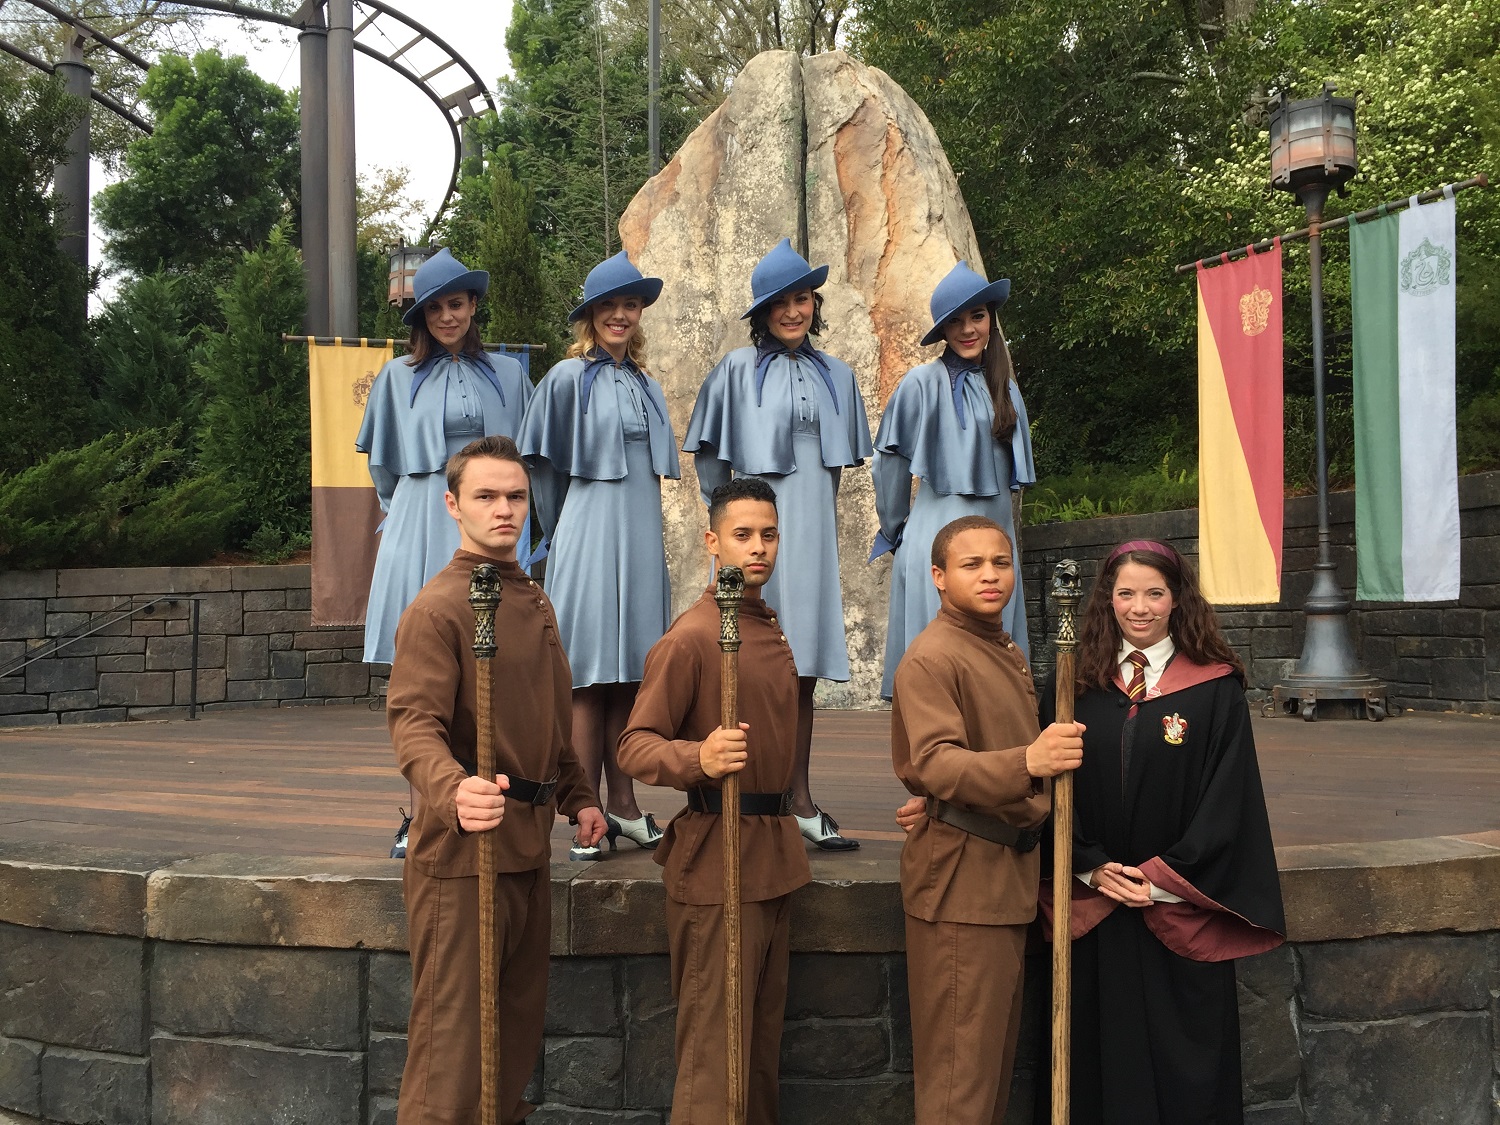 Triwizard Spirit Rally Performers - Harry Potter at Islands of Adventure